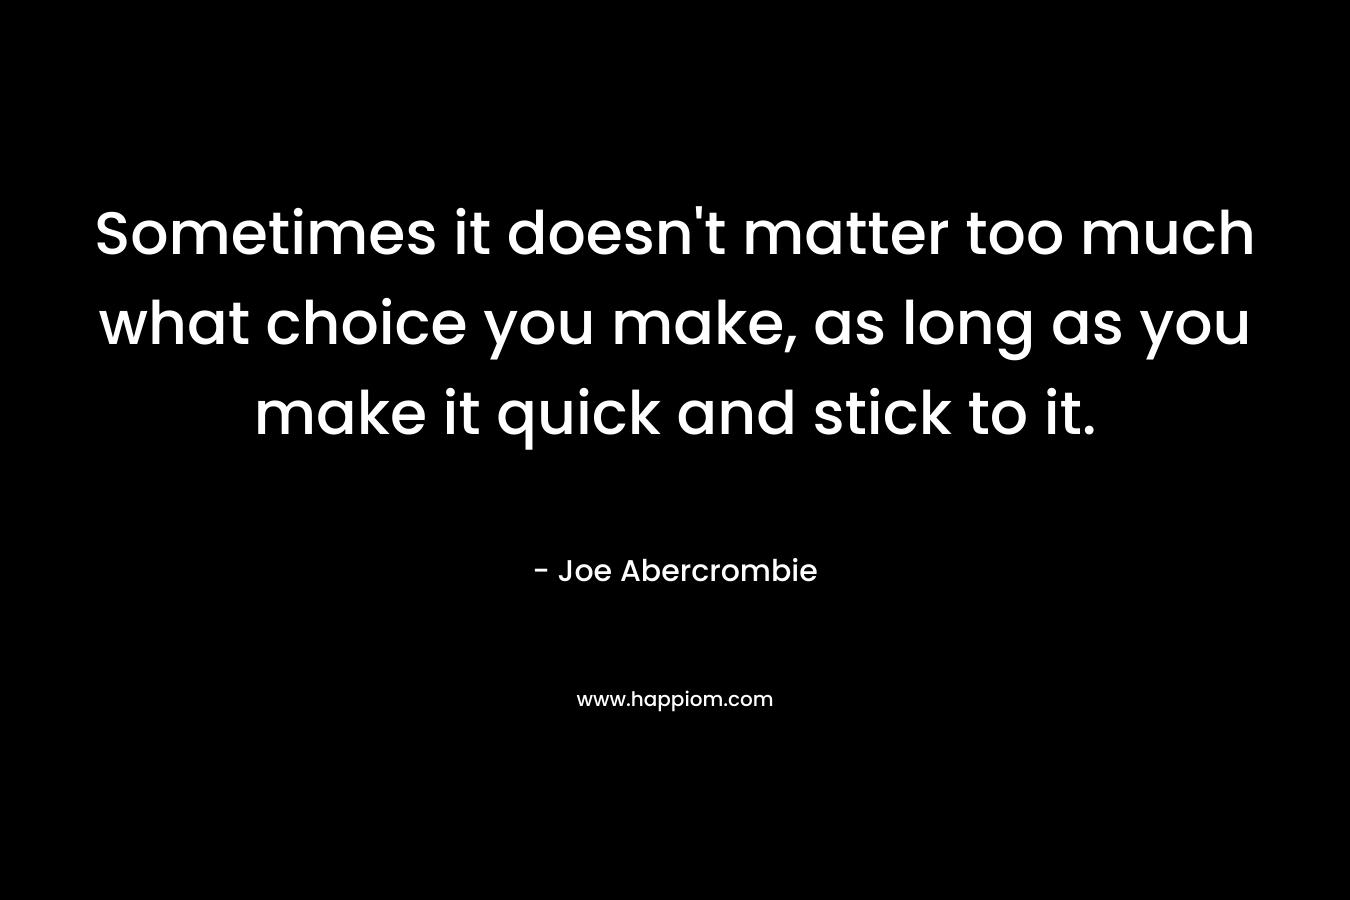 Sometimes it doesn’t matter too much what choice you make, as long as you make it quick and stick to it. – Joe Abercrombie